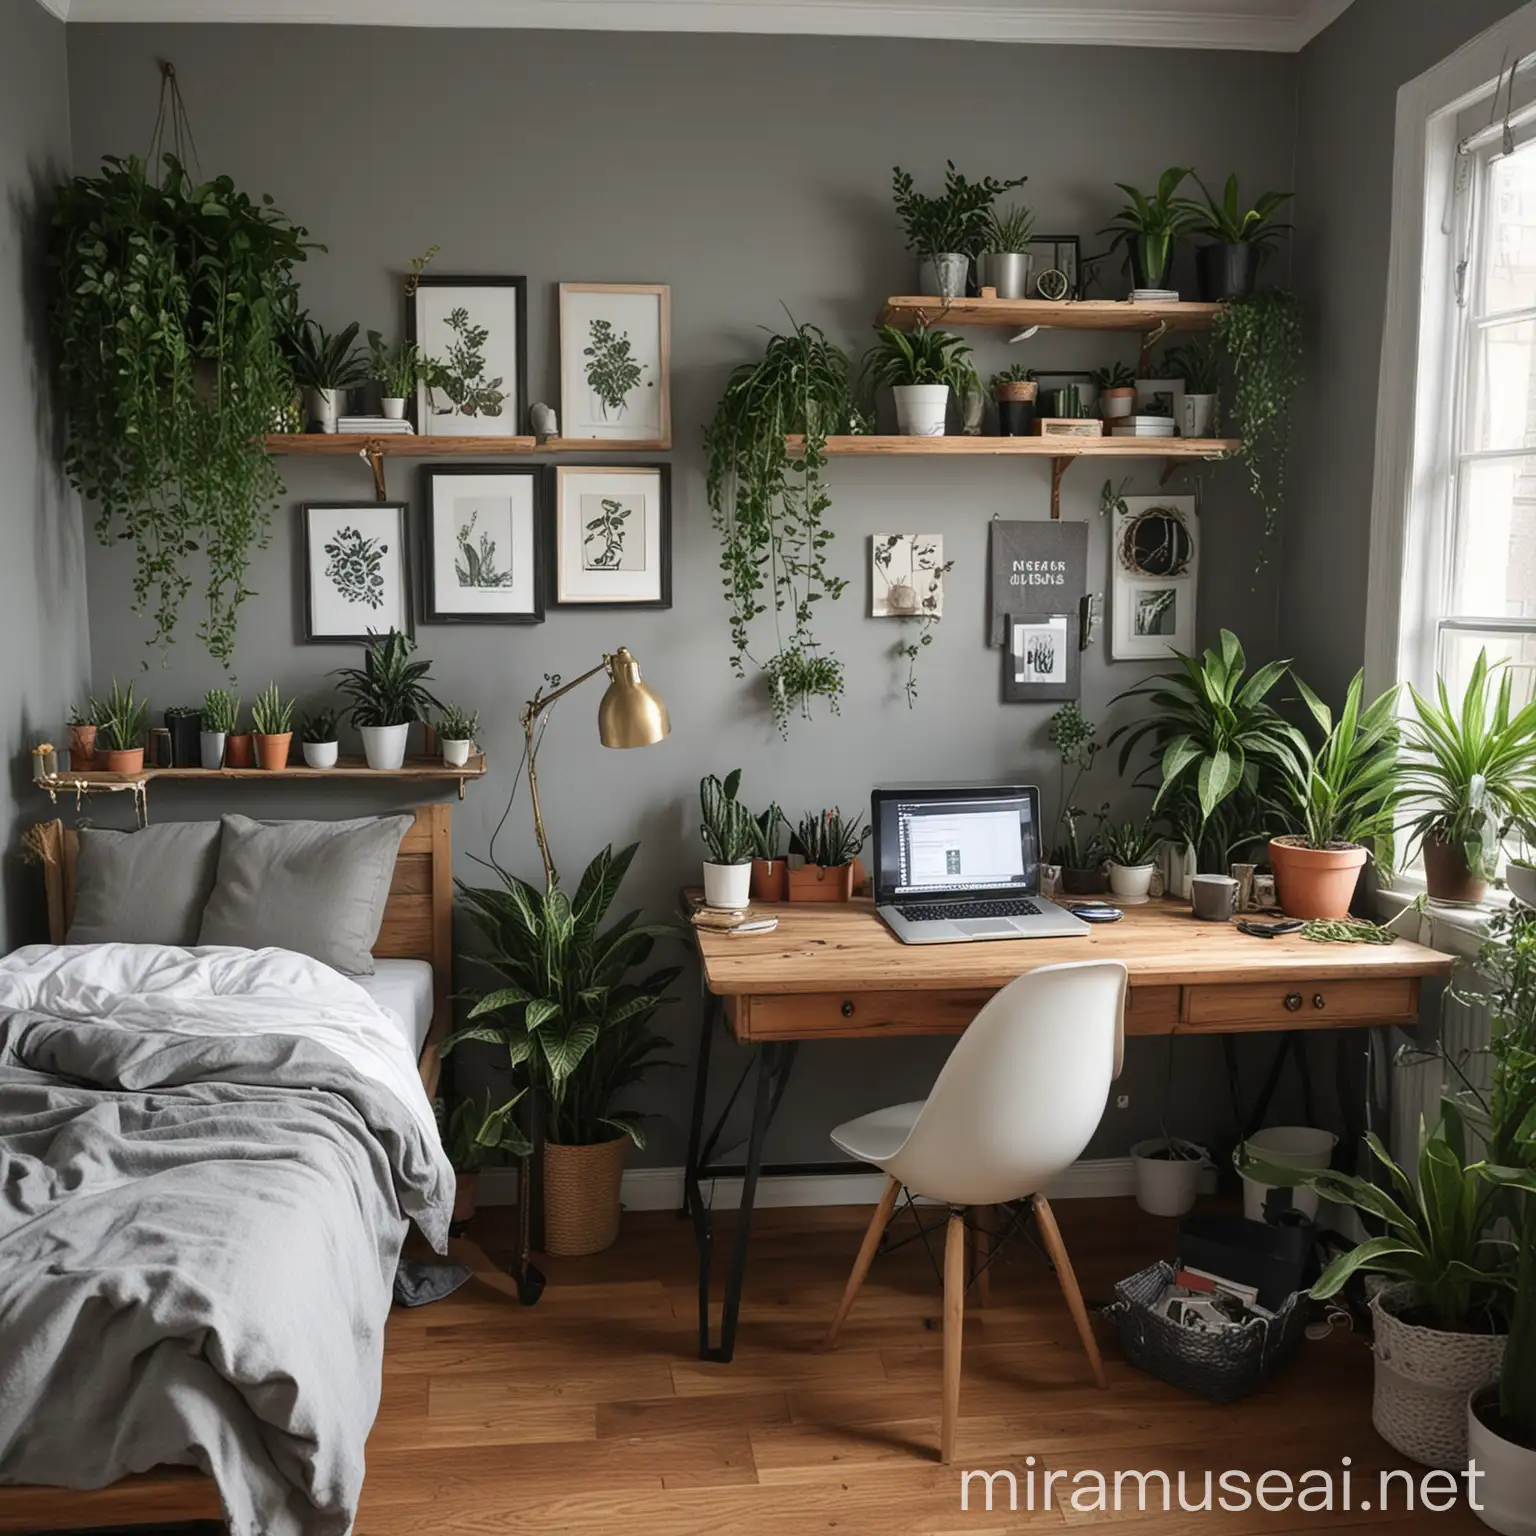 Cozy Home Interior with Gray Walls and Abundant Greenery